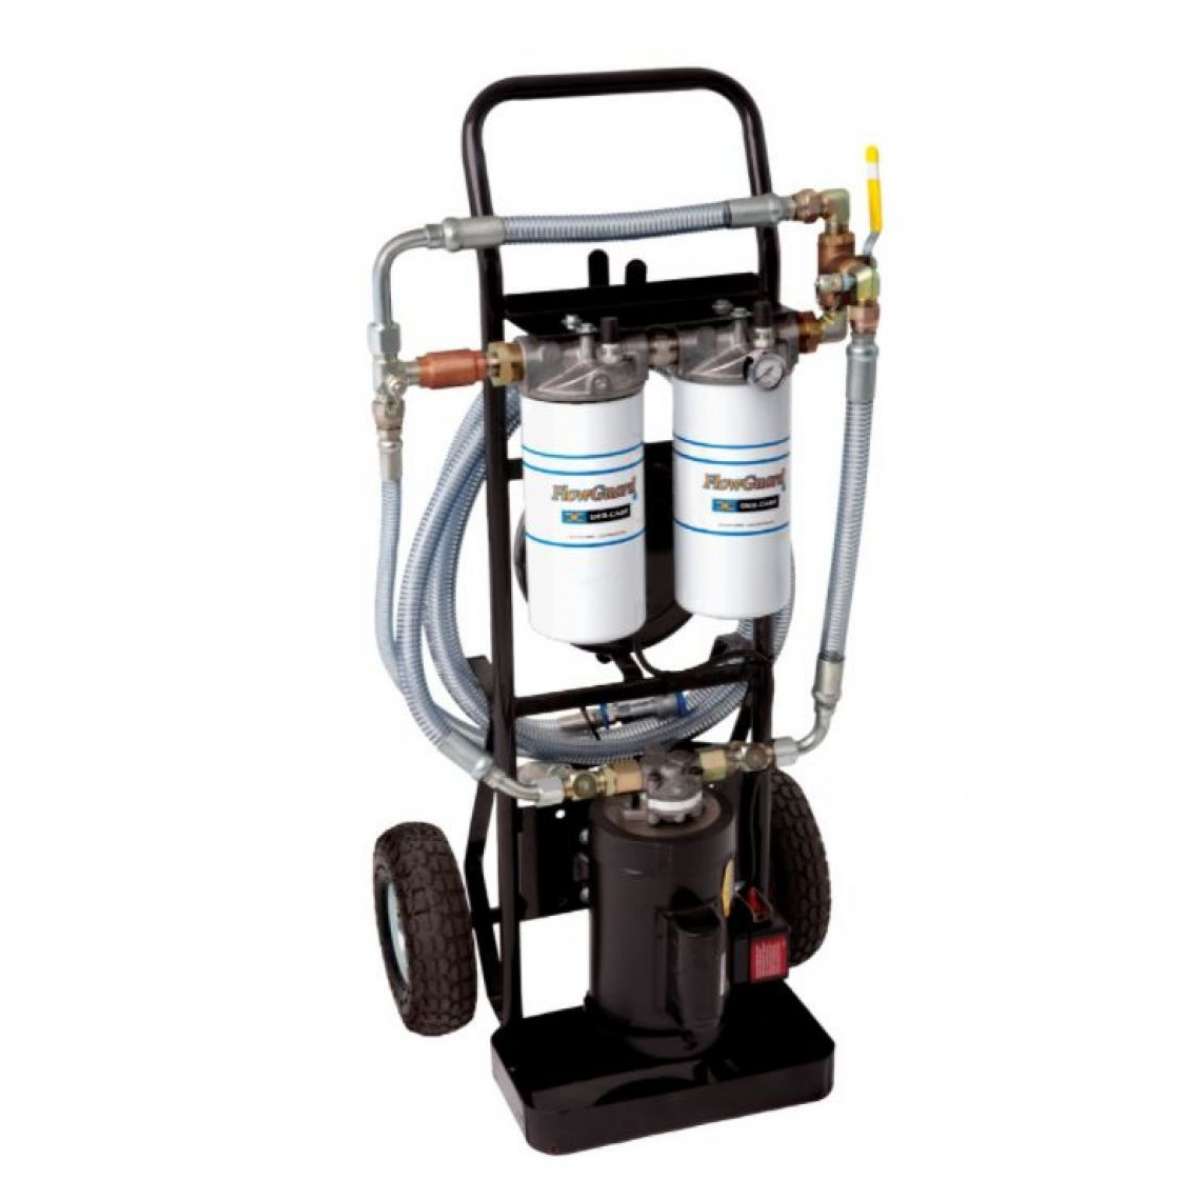 2 GPM 115 vac Dual Stage Filtration Cart Best for Gear Oil